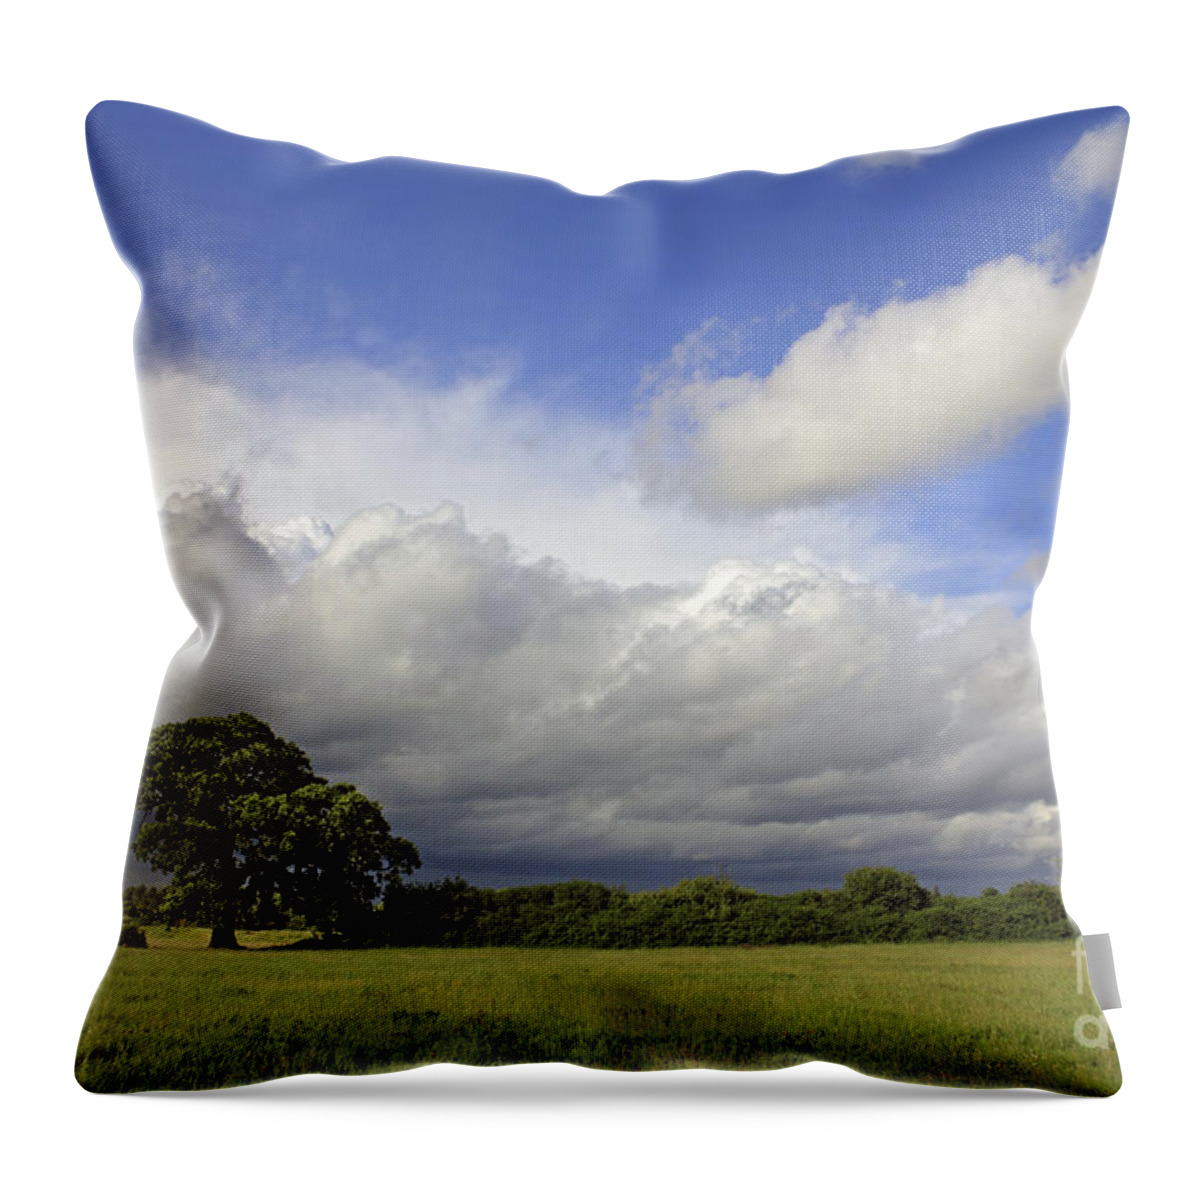 English Oak Under Stormy Skies Landscape Countryside English British England Clouds Dramatic Storm Cloud Fluffy Throw Pillow featuring the photograph English Oak under Stormy Skies by Julia Gavin